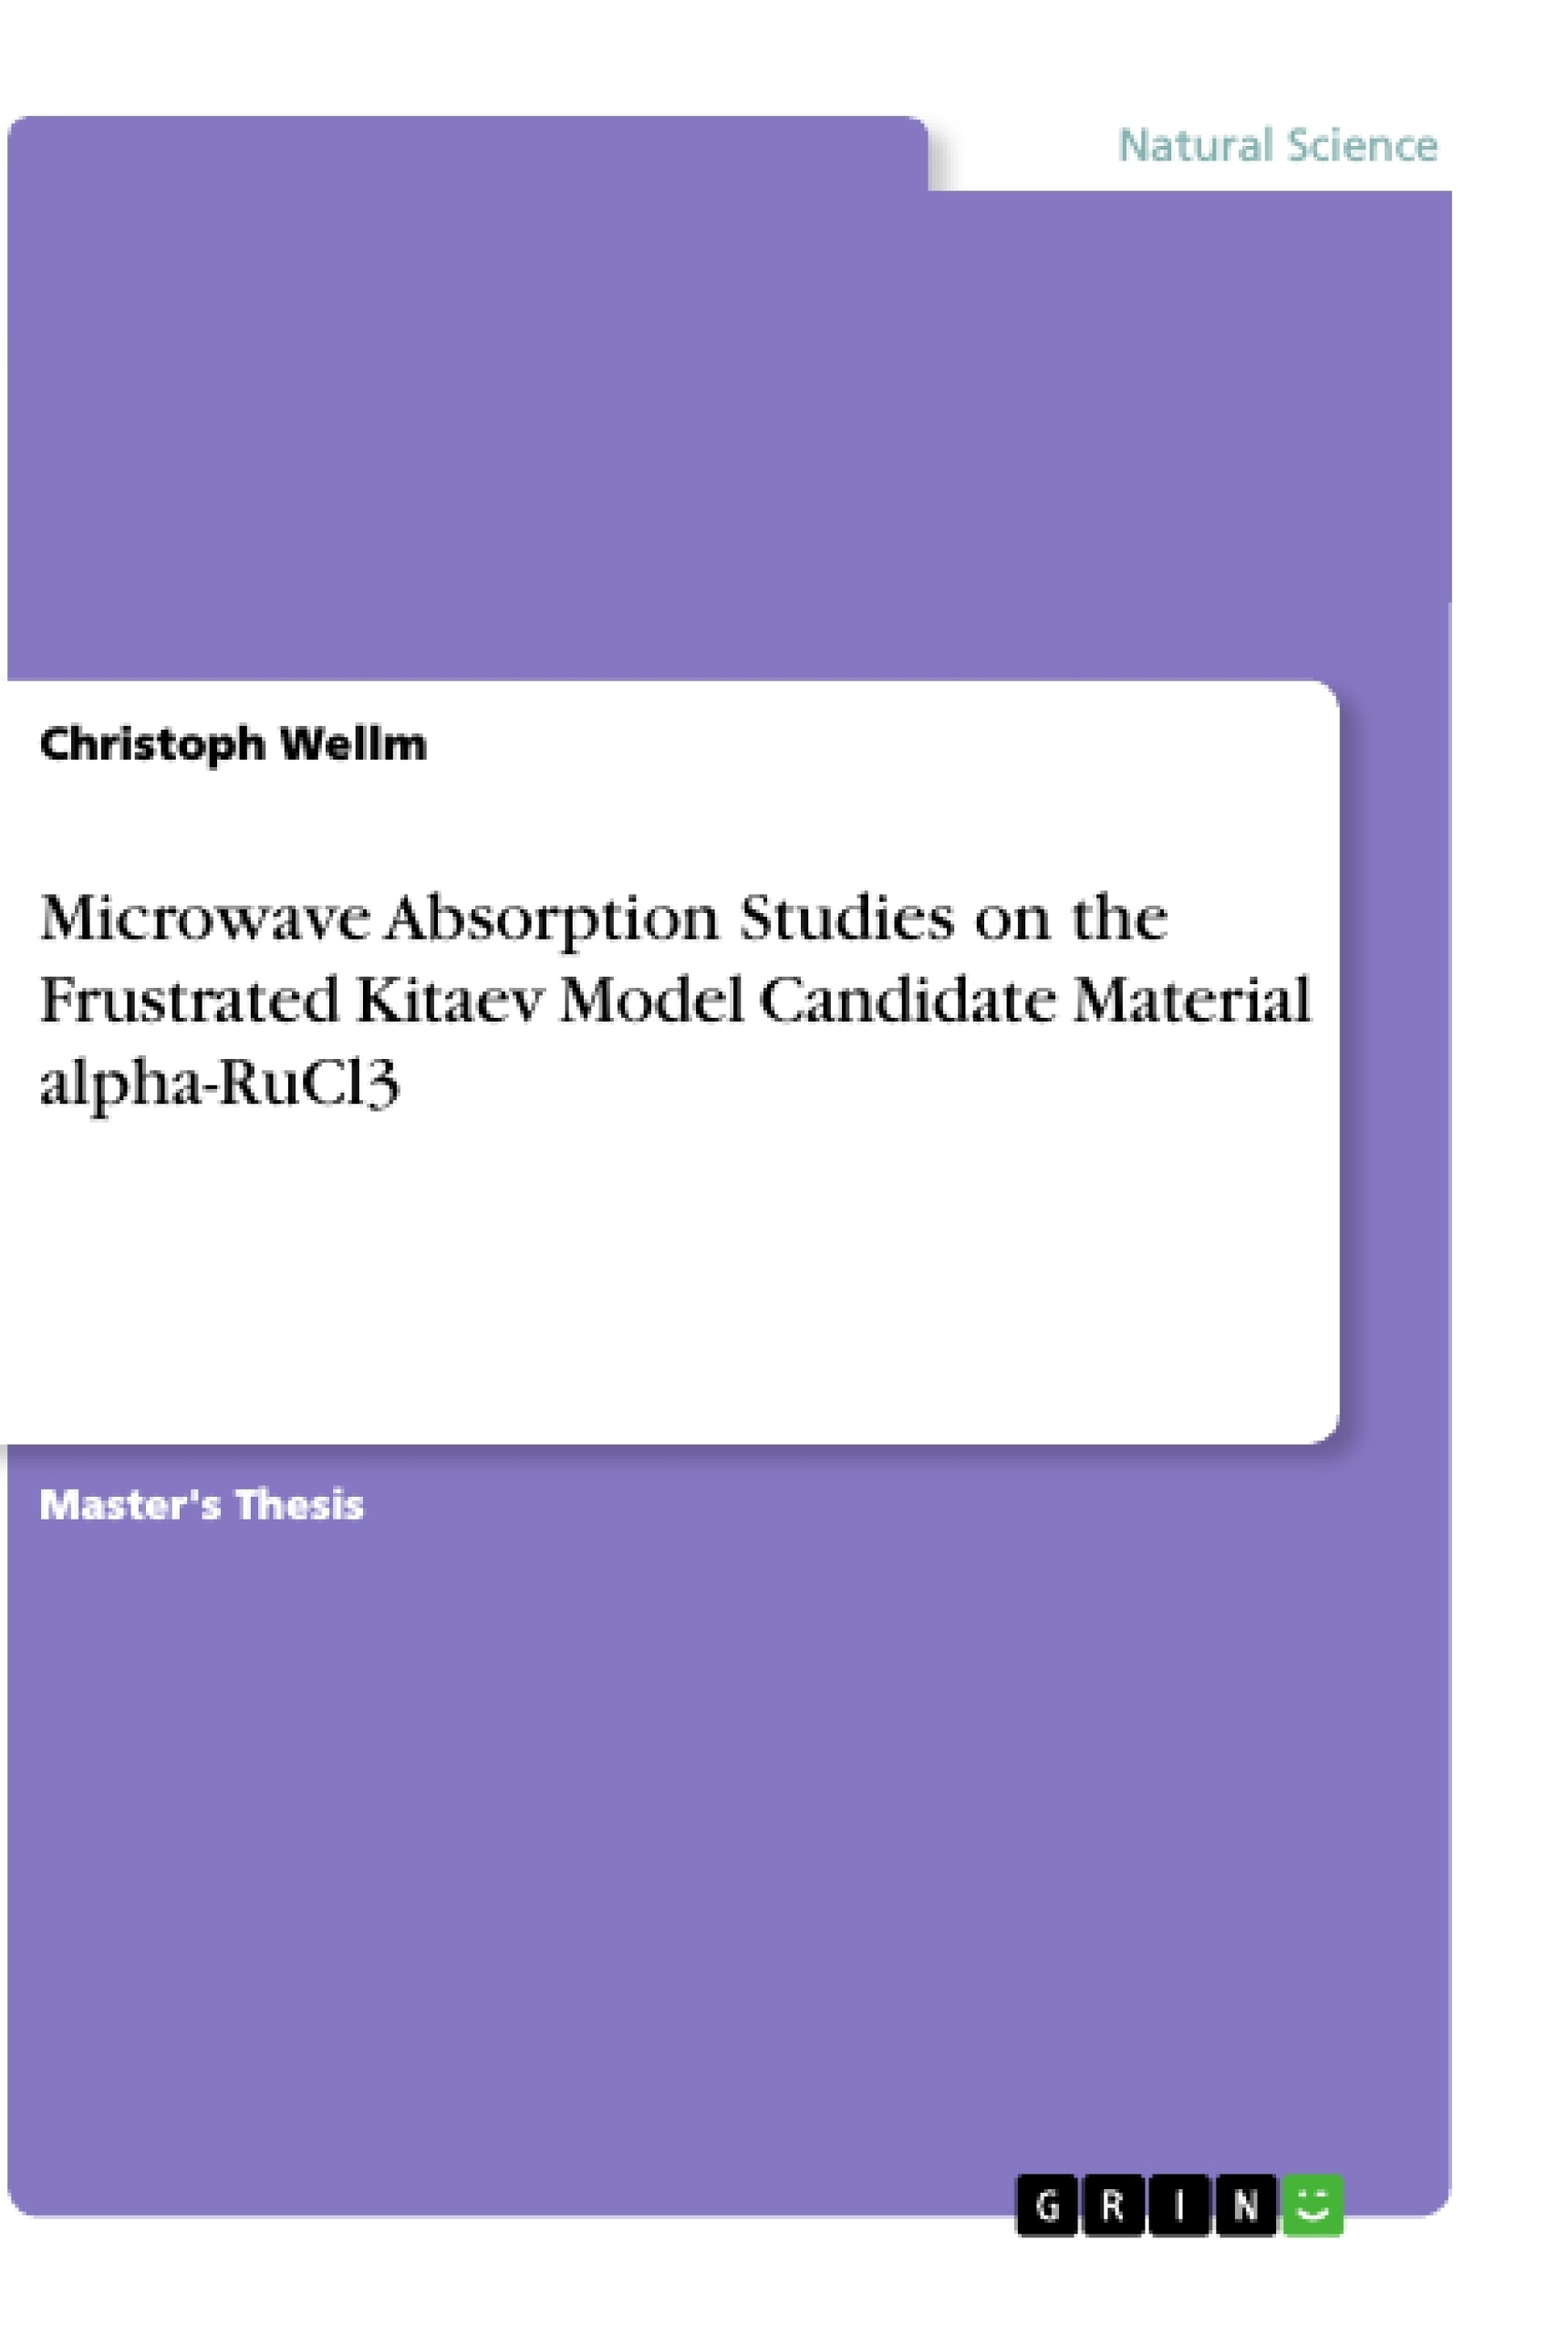 Title: Microwave Absorption Studies on the Frustrated Kitaev Model Candidate Material alpha-RuCl3